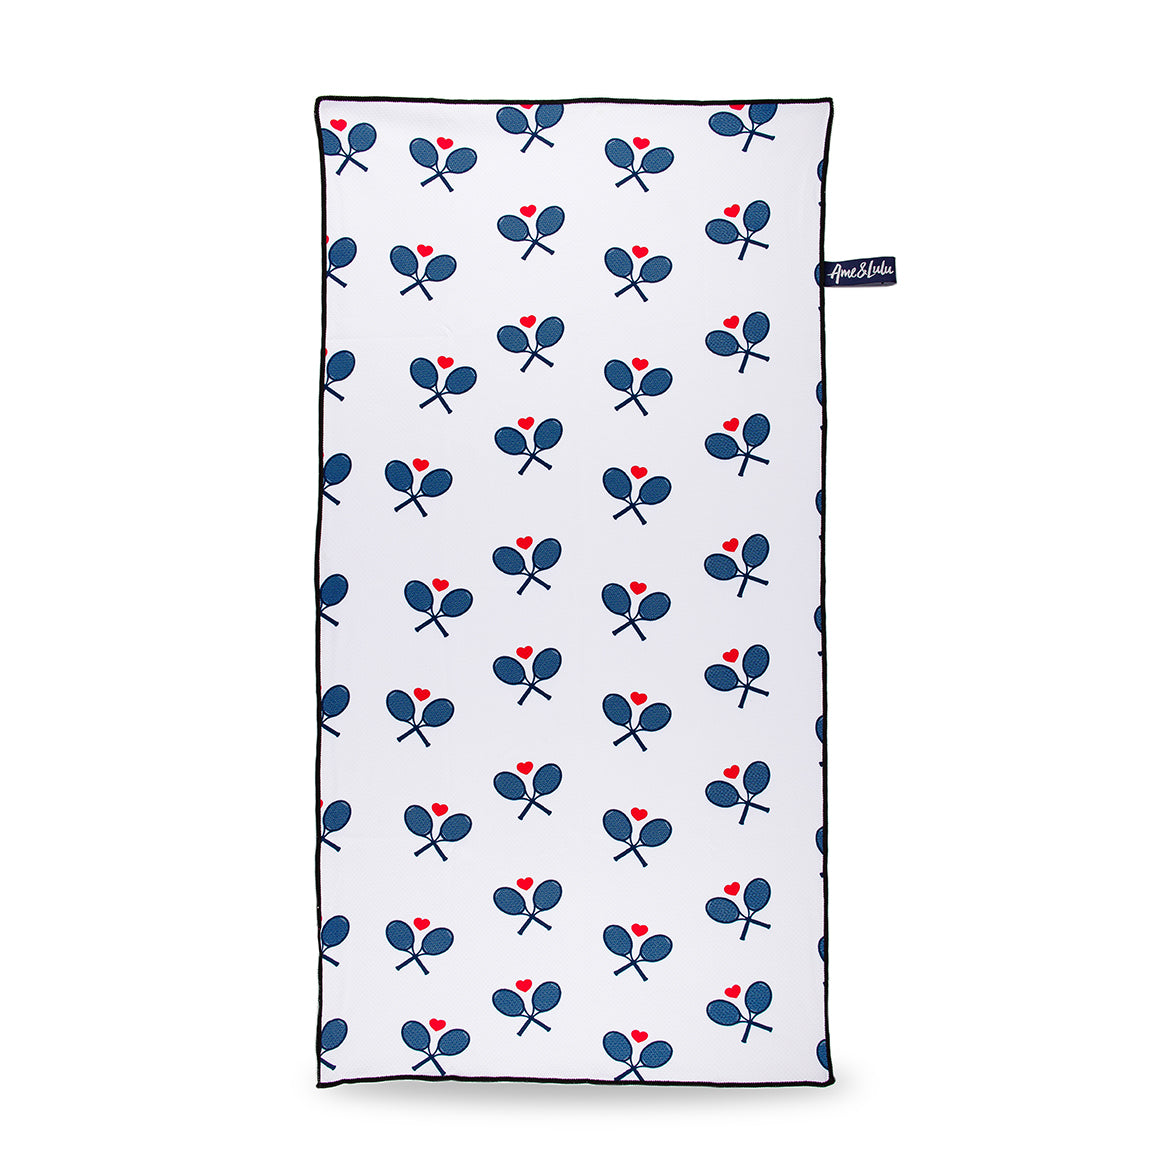 White rectangular towel with repeating navy crossed racquets and red hearts.